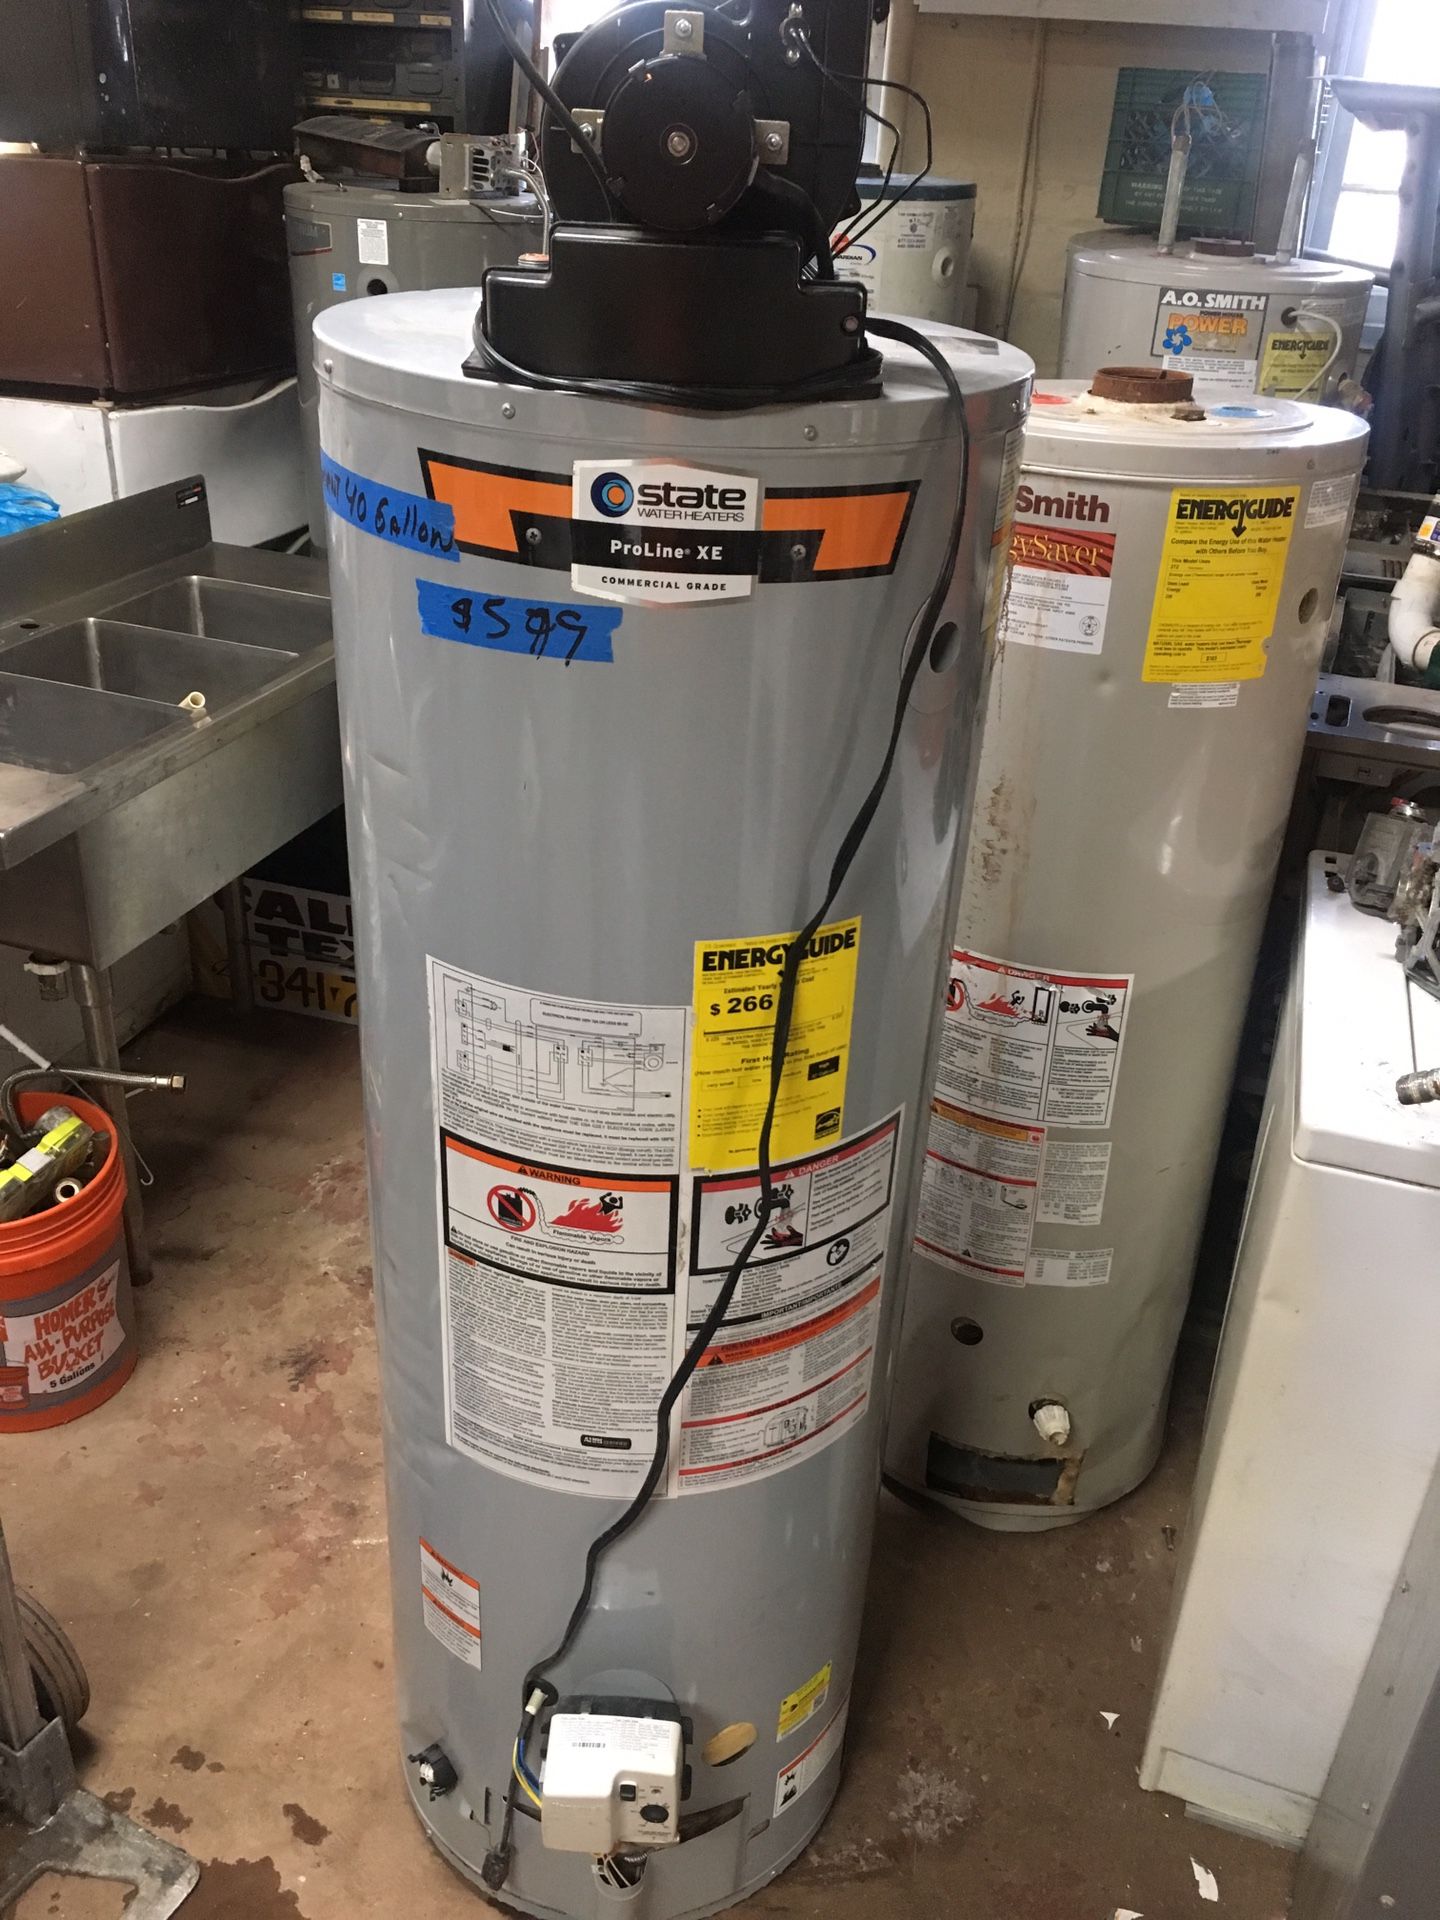 Power vent water heater and electric water heater